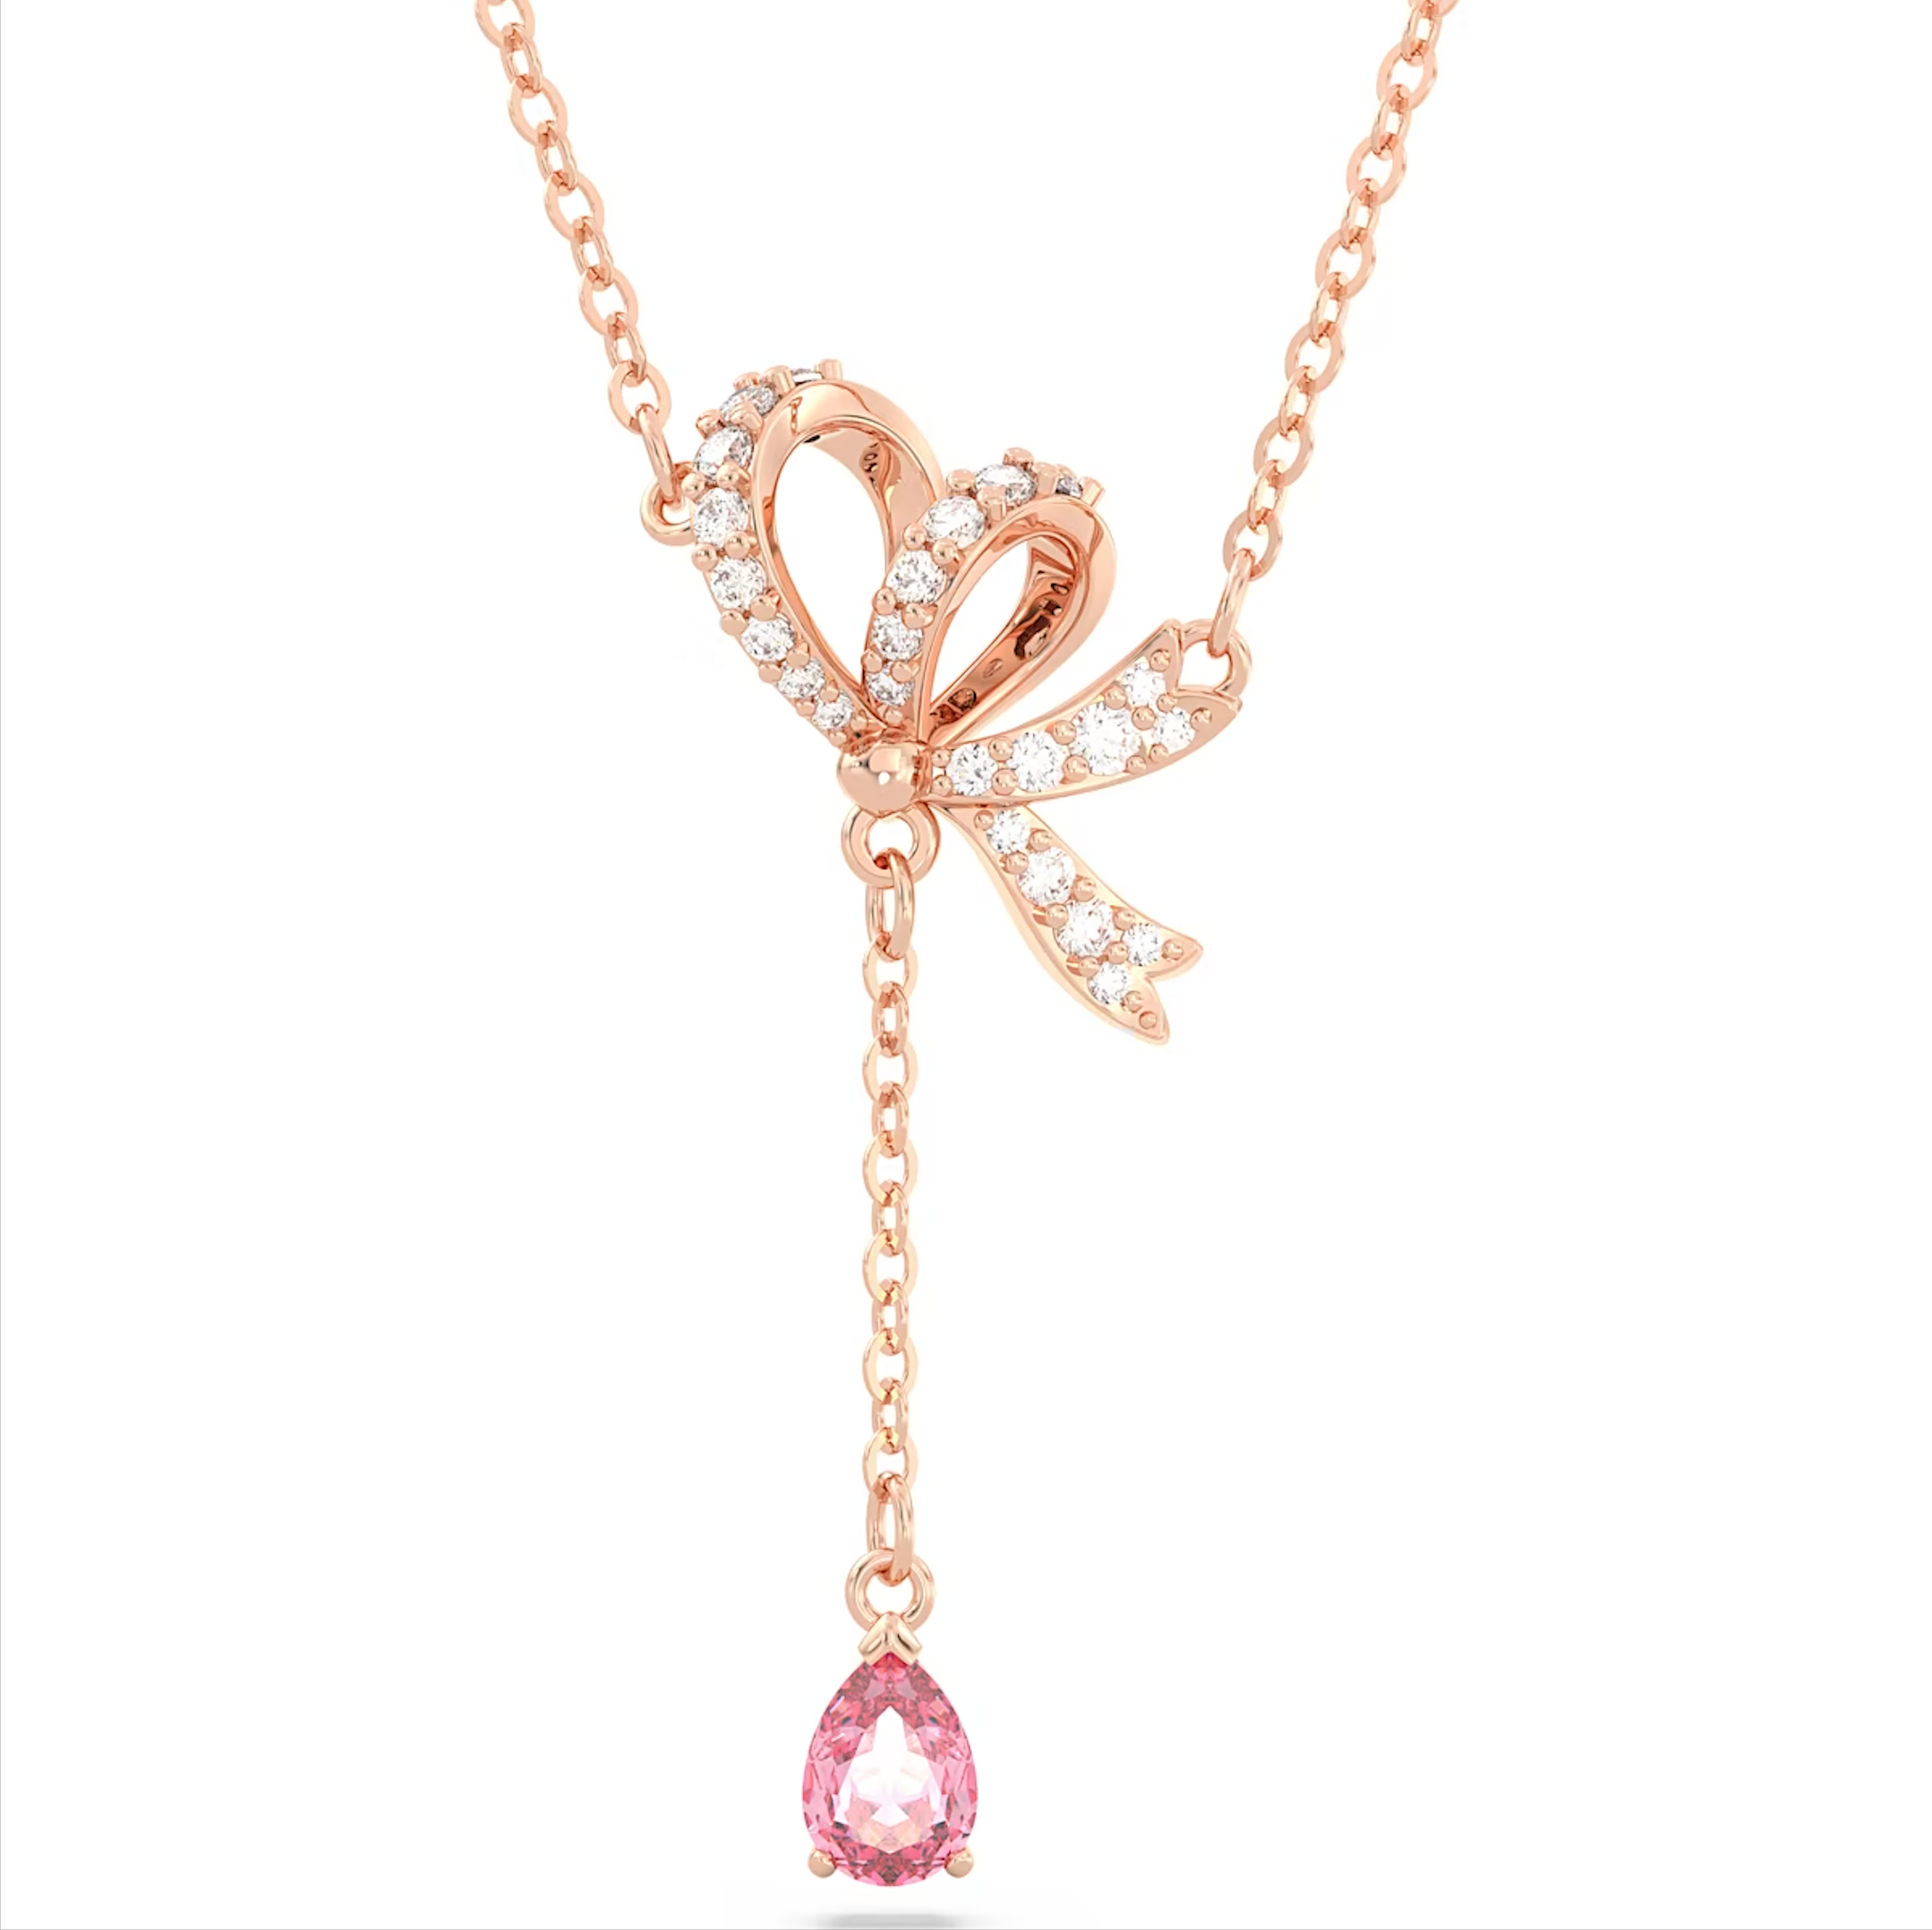 Swarovski Volta Rose Gold Tone Plated Bow Pink Crystal Necklace